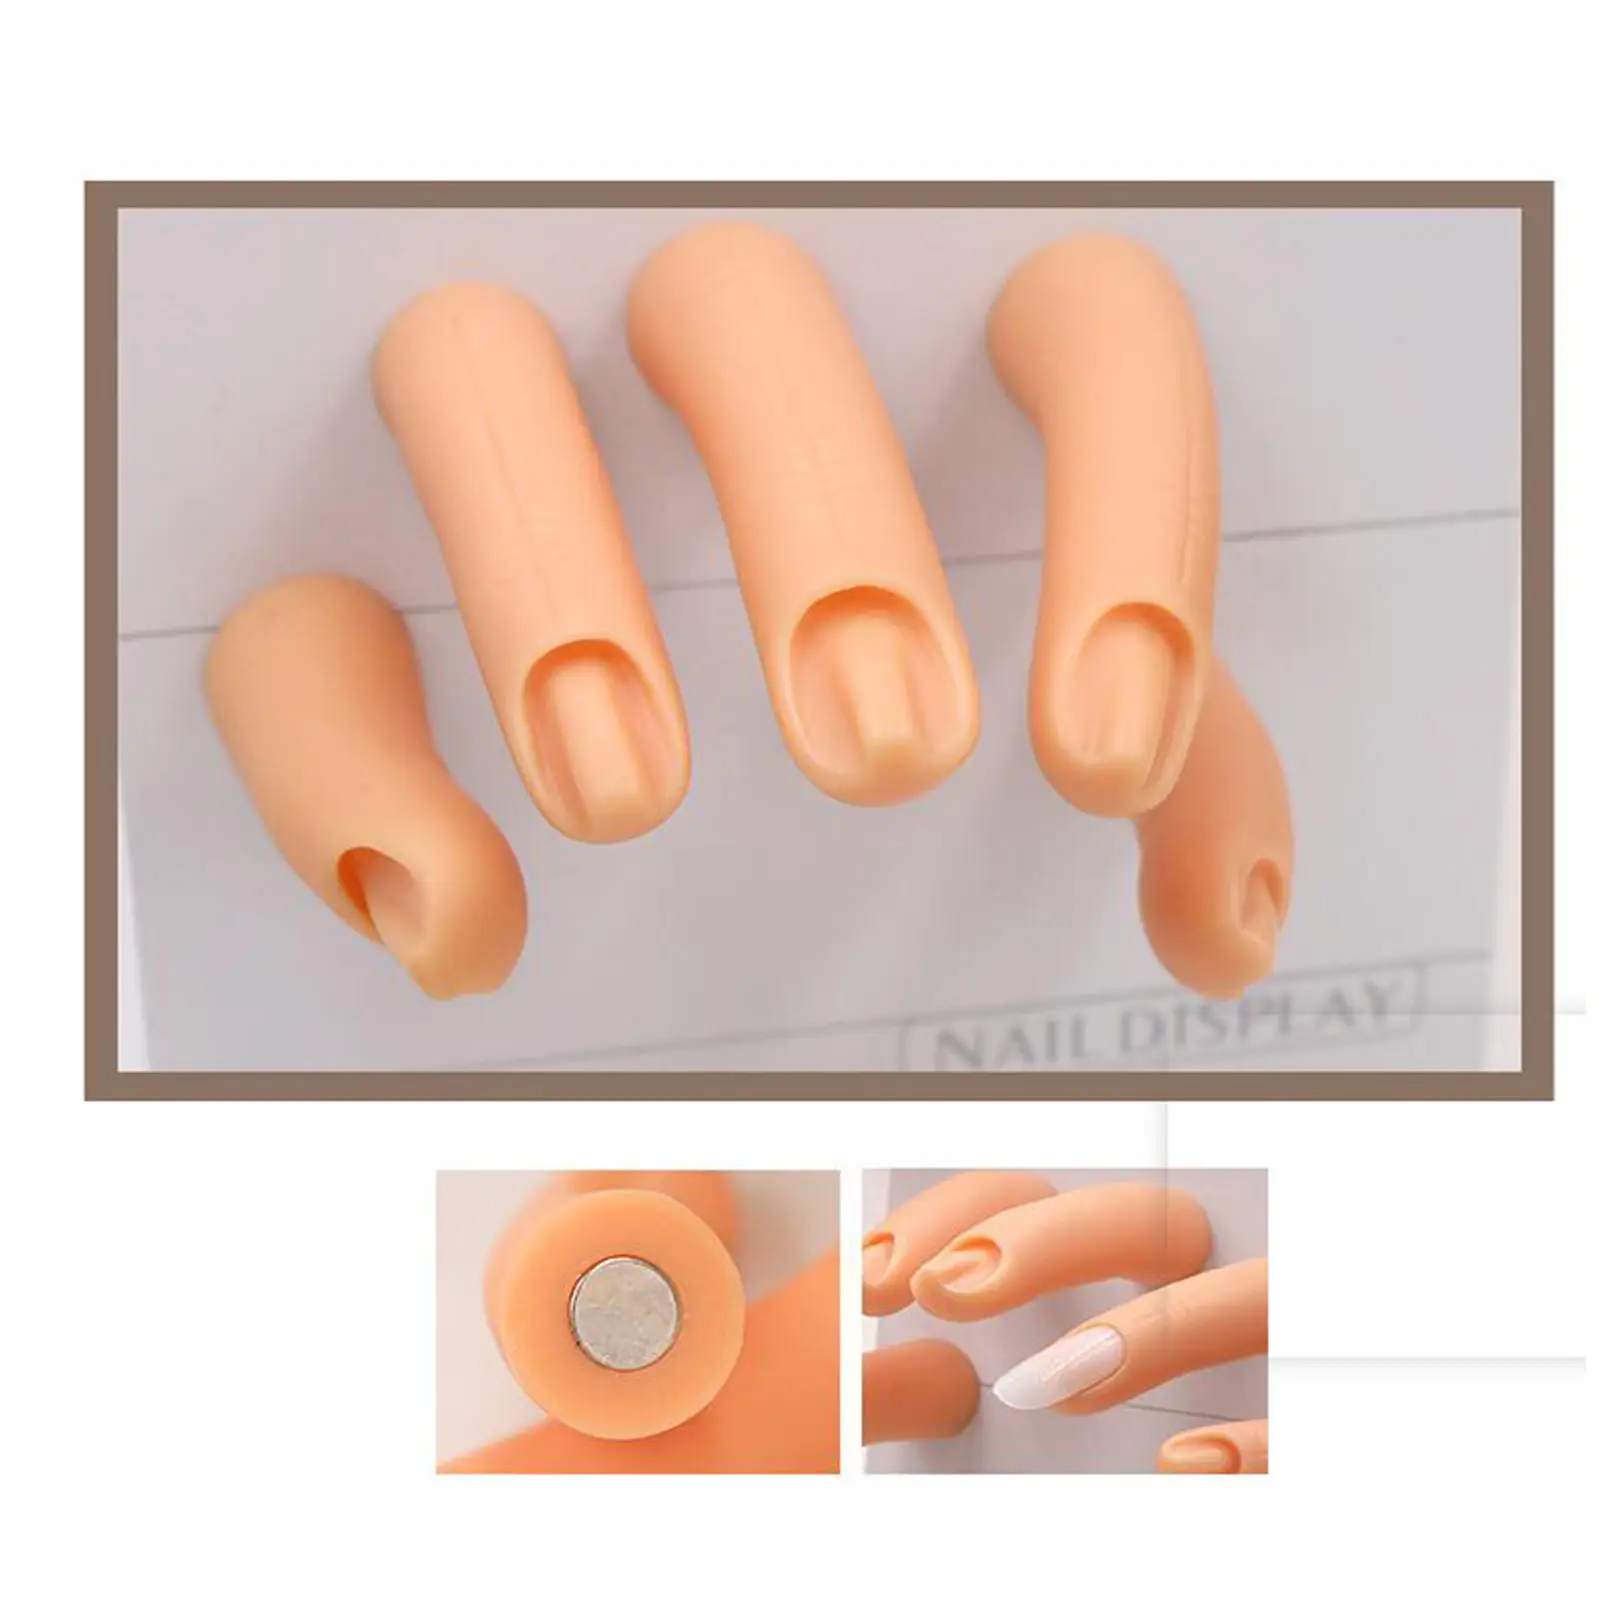 Nail Art Training Tool Manicure Supply Magnetic Plastic Silicone Training Hand for Nail Salon